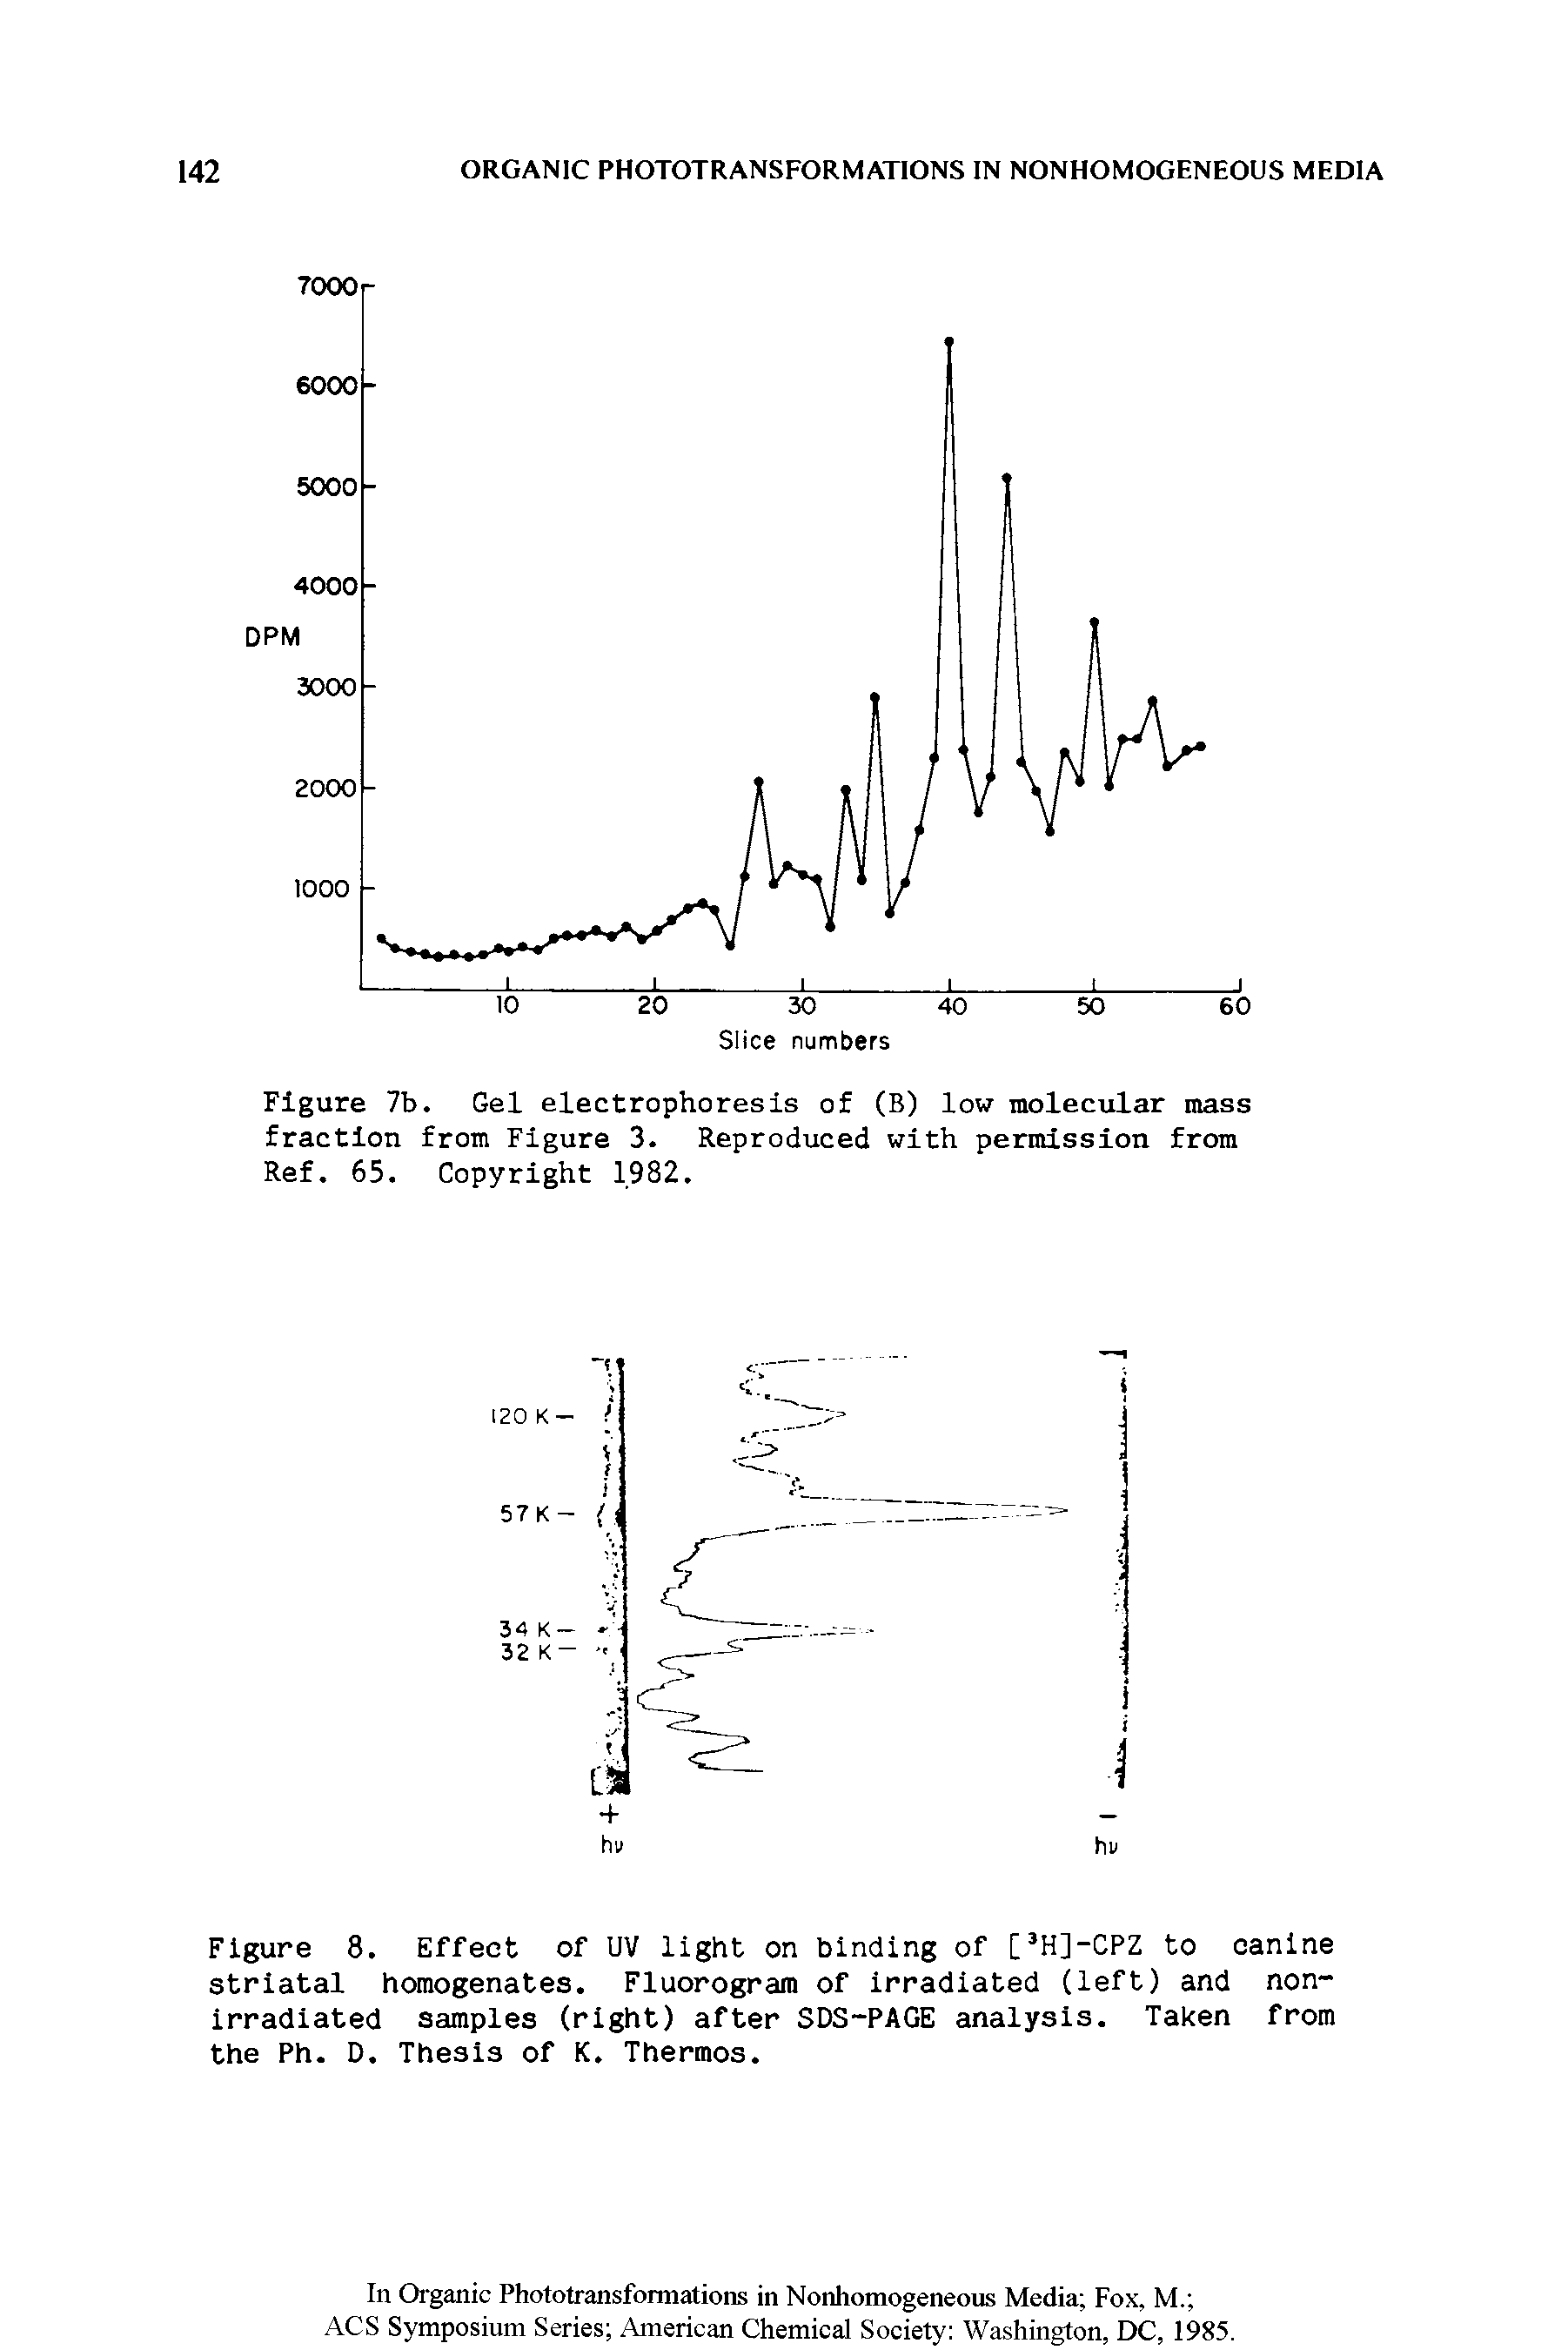 Figure 7b. Gel electrophoresis of (B) low molecular mass fraction from Figure 3. Reproduced with permission from Ref. 65. Copyright 1982.